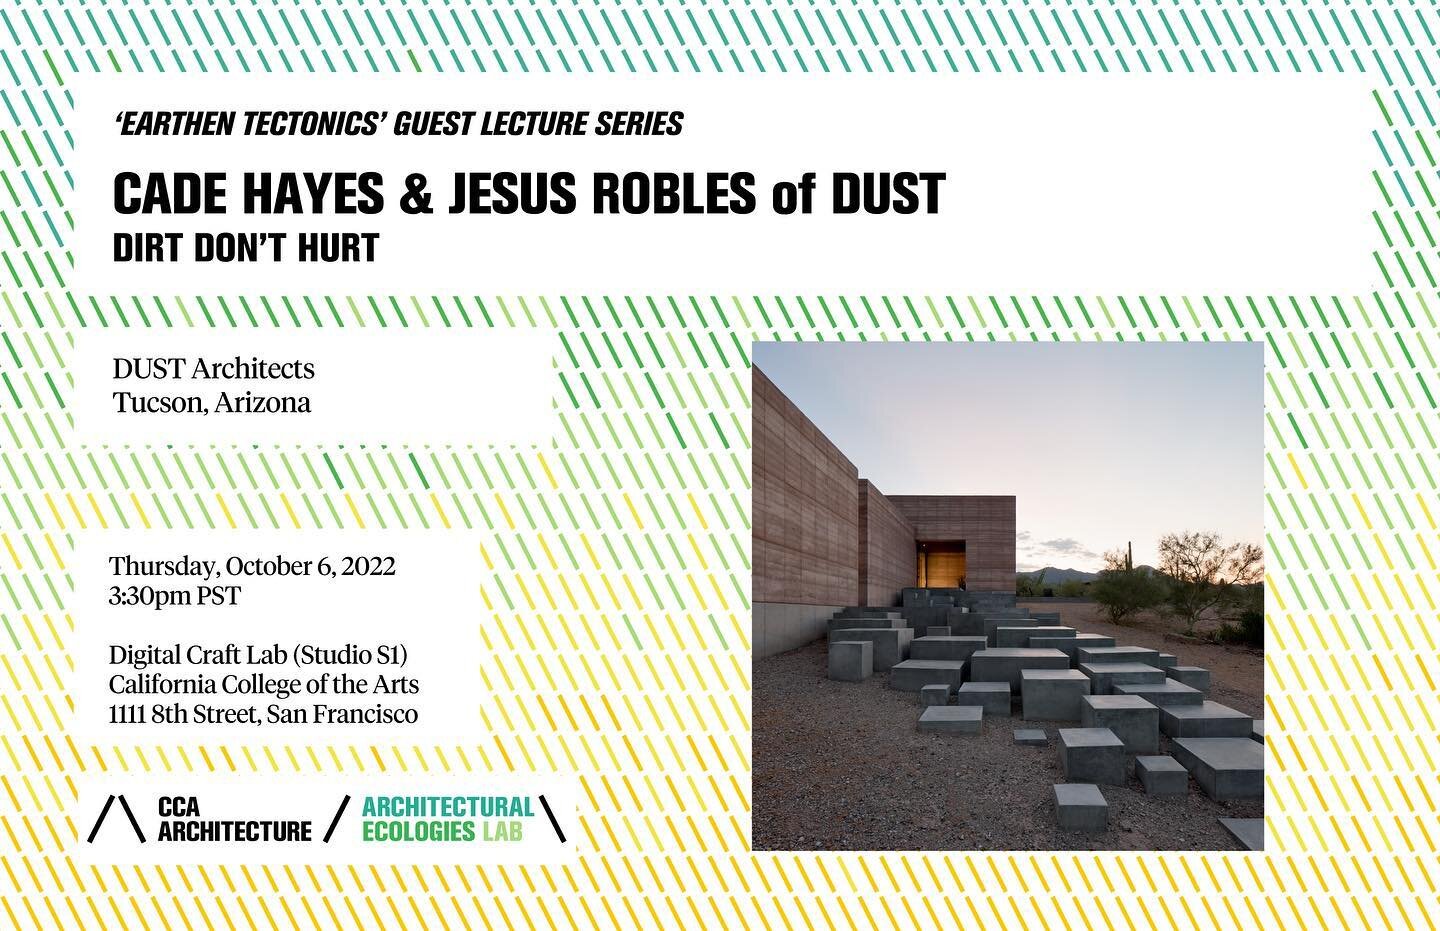 Tomorrow, Thursday October 6: Join us for a talk by Cade Hayes @ch_dust and Jes&uacute;s Robles @jr_dust of DUST @dust_architects, who will present their Tucson-based practice and compelling work with rammed earth construction. The talk is organized 